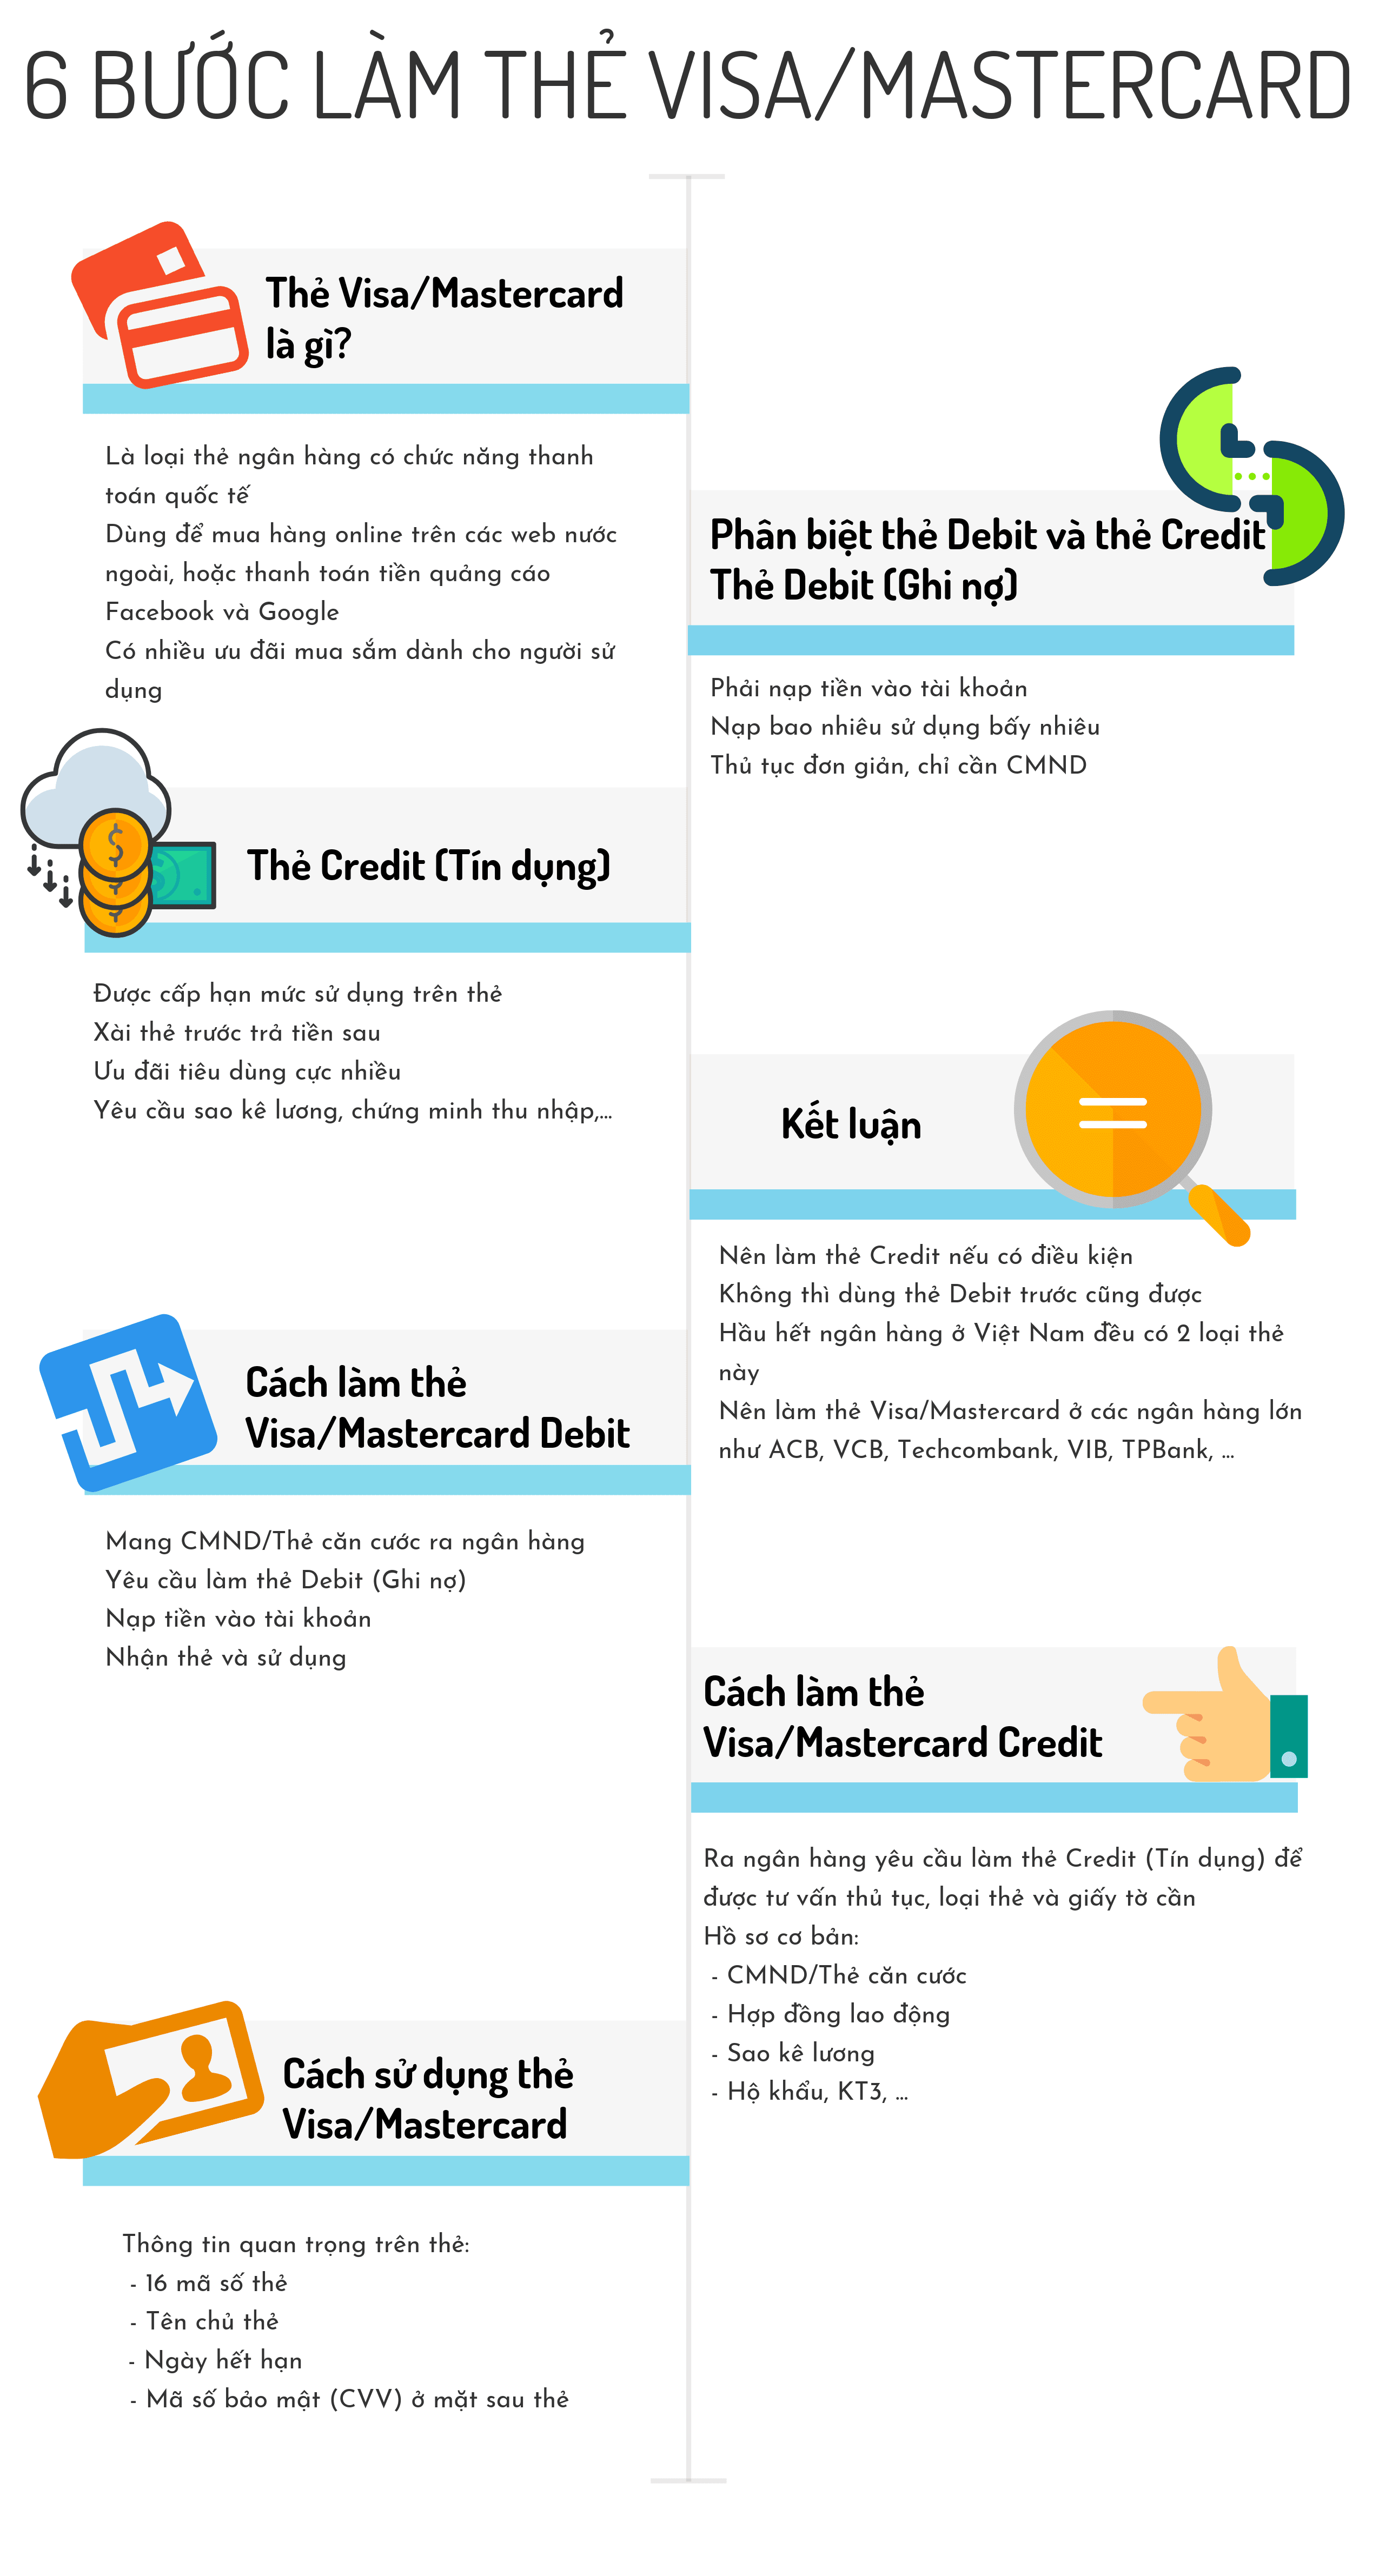 fd12908668aa613481d866cd1d40c1a7.cach lam the visa infographic